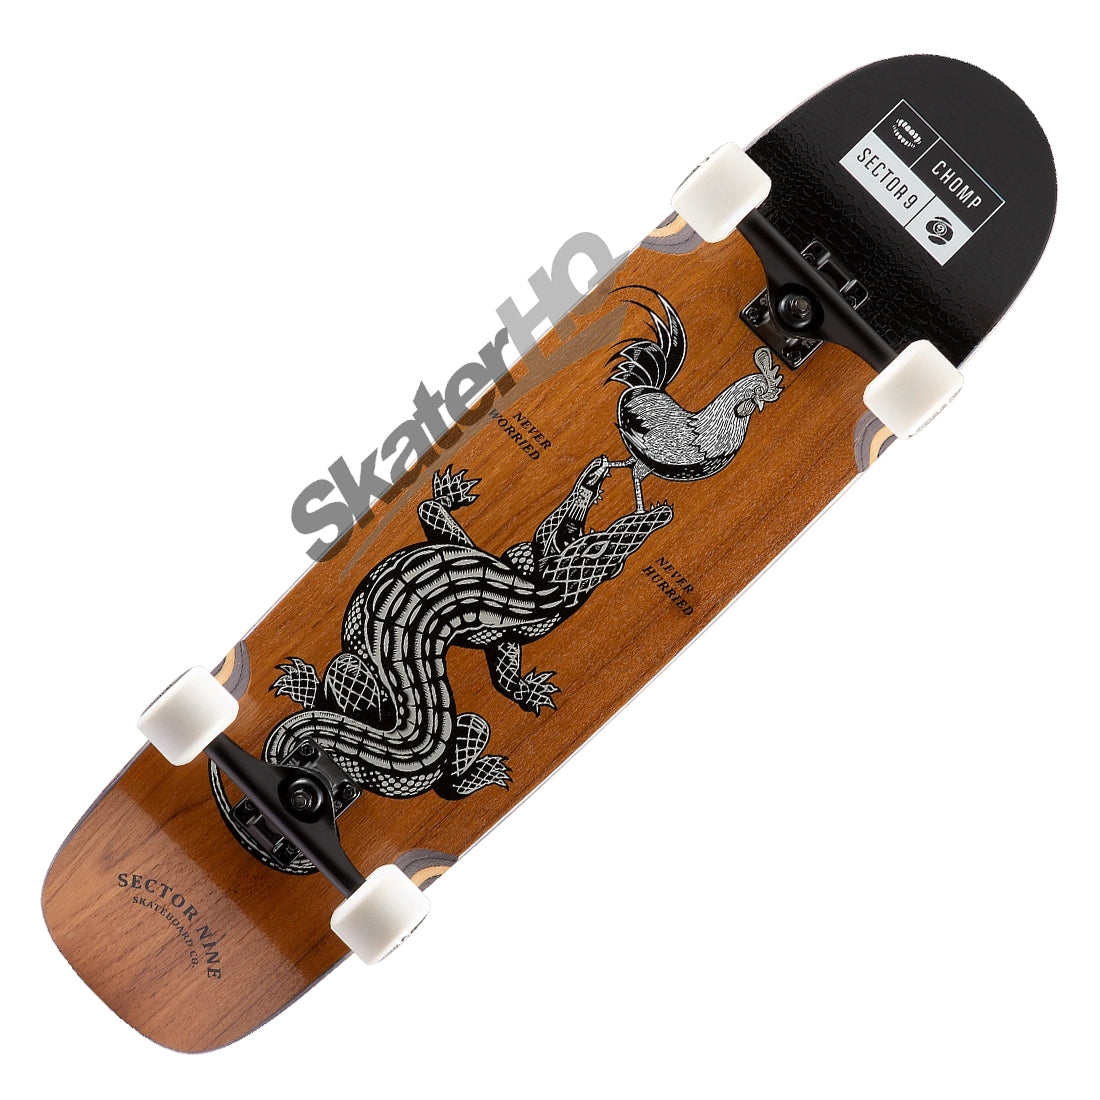 Sector 9 Rooster Sweeper 36 Complete - Wood/Black Skateboard Compl Cruisers